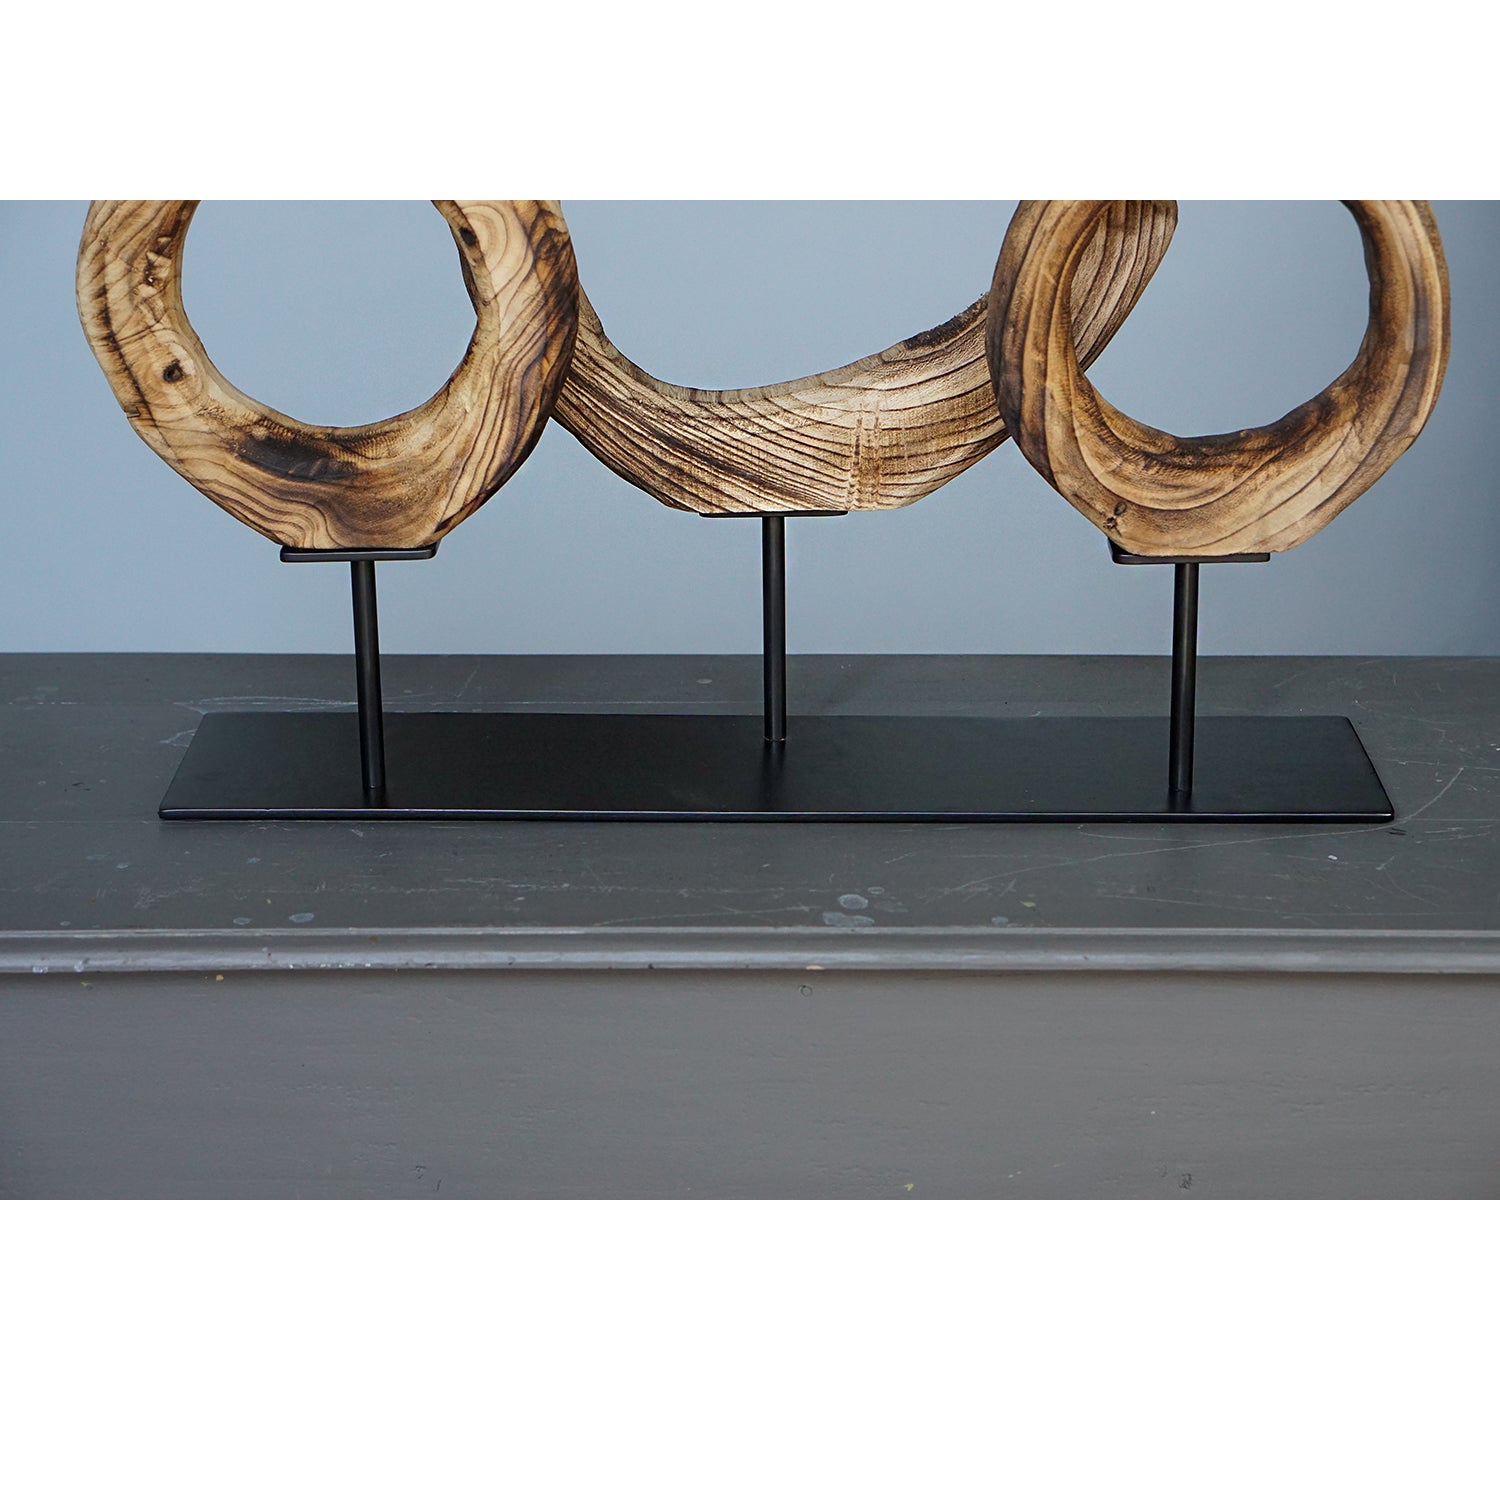 Wood Ring Sculpture x3 on Stand